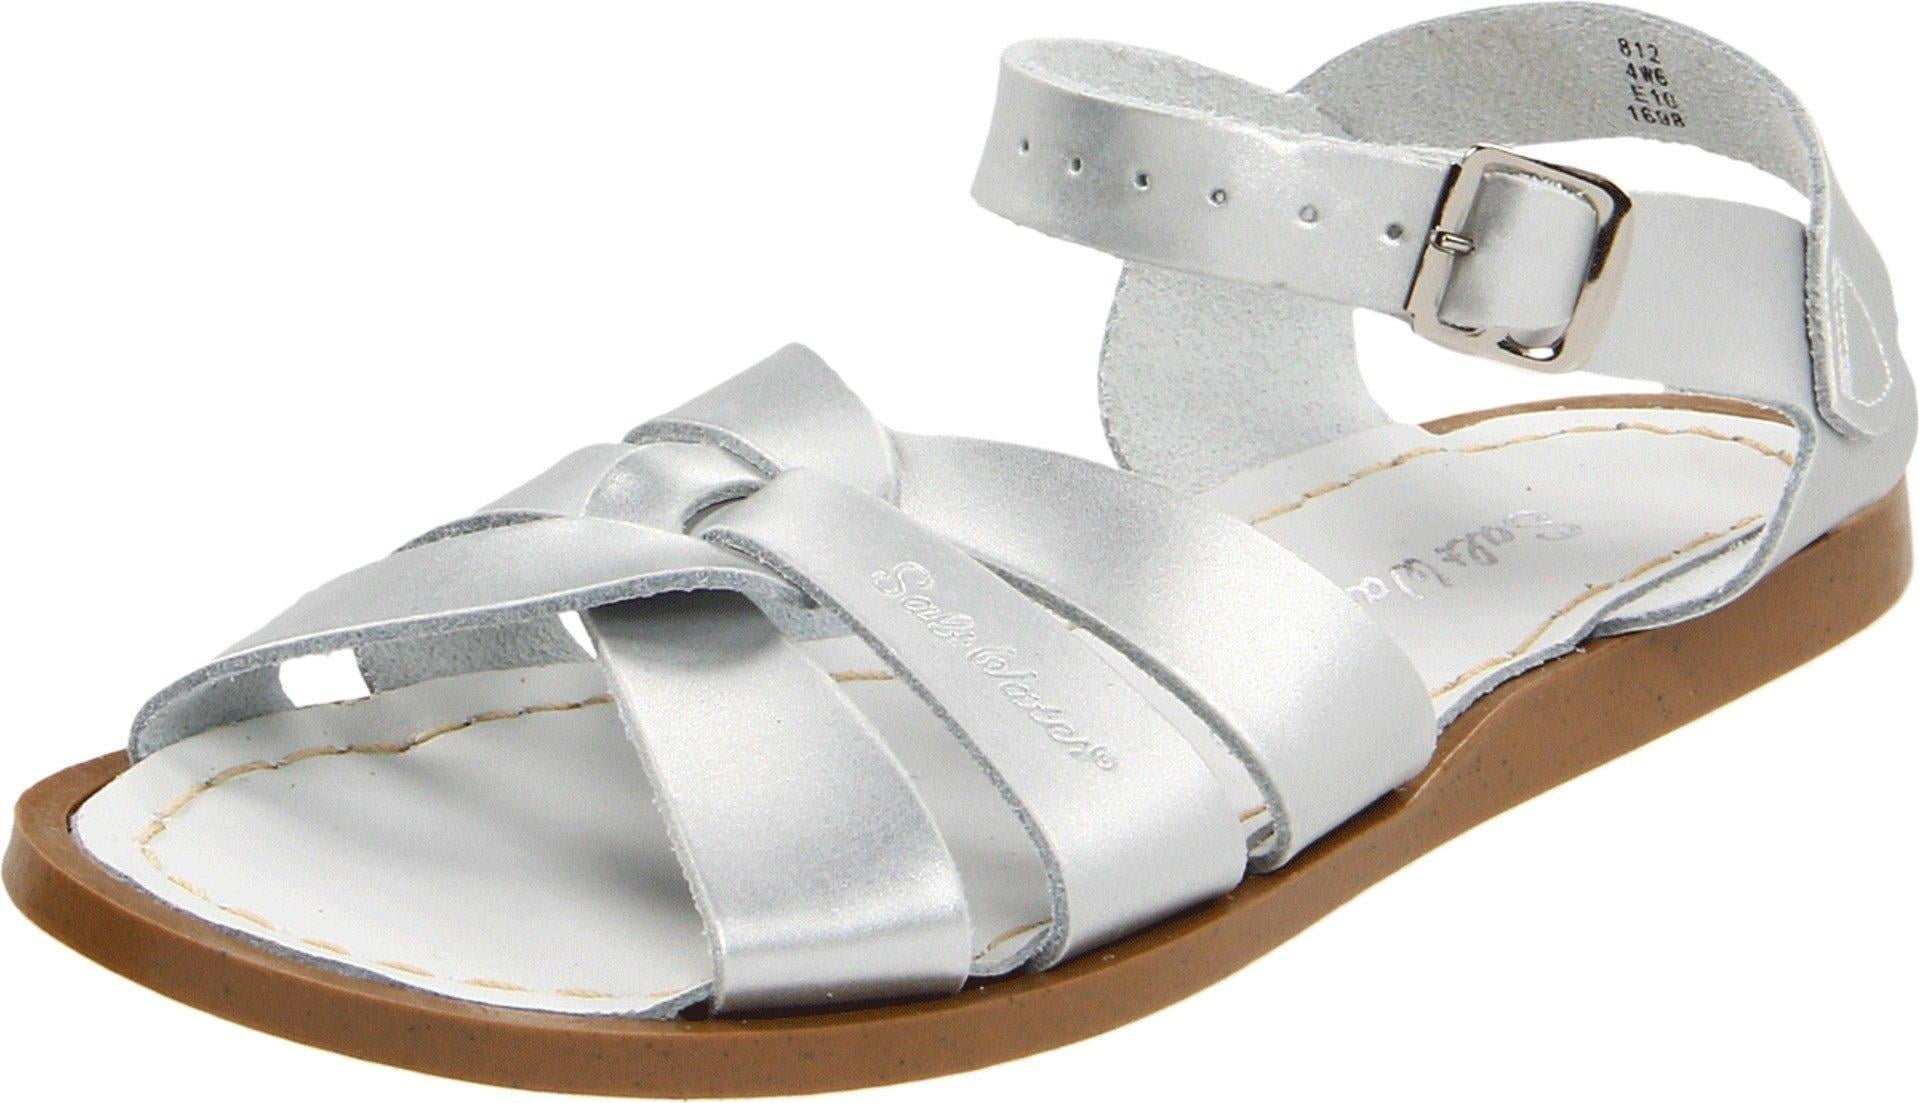 salt water sandal by hoy shoes